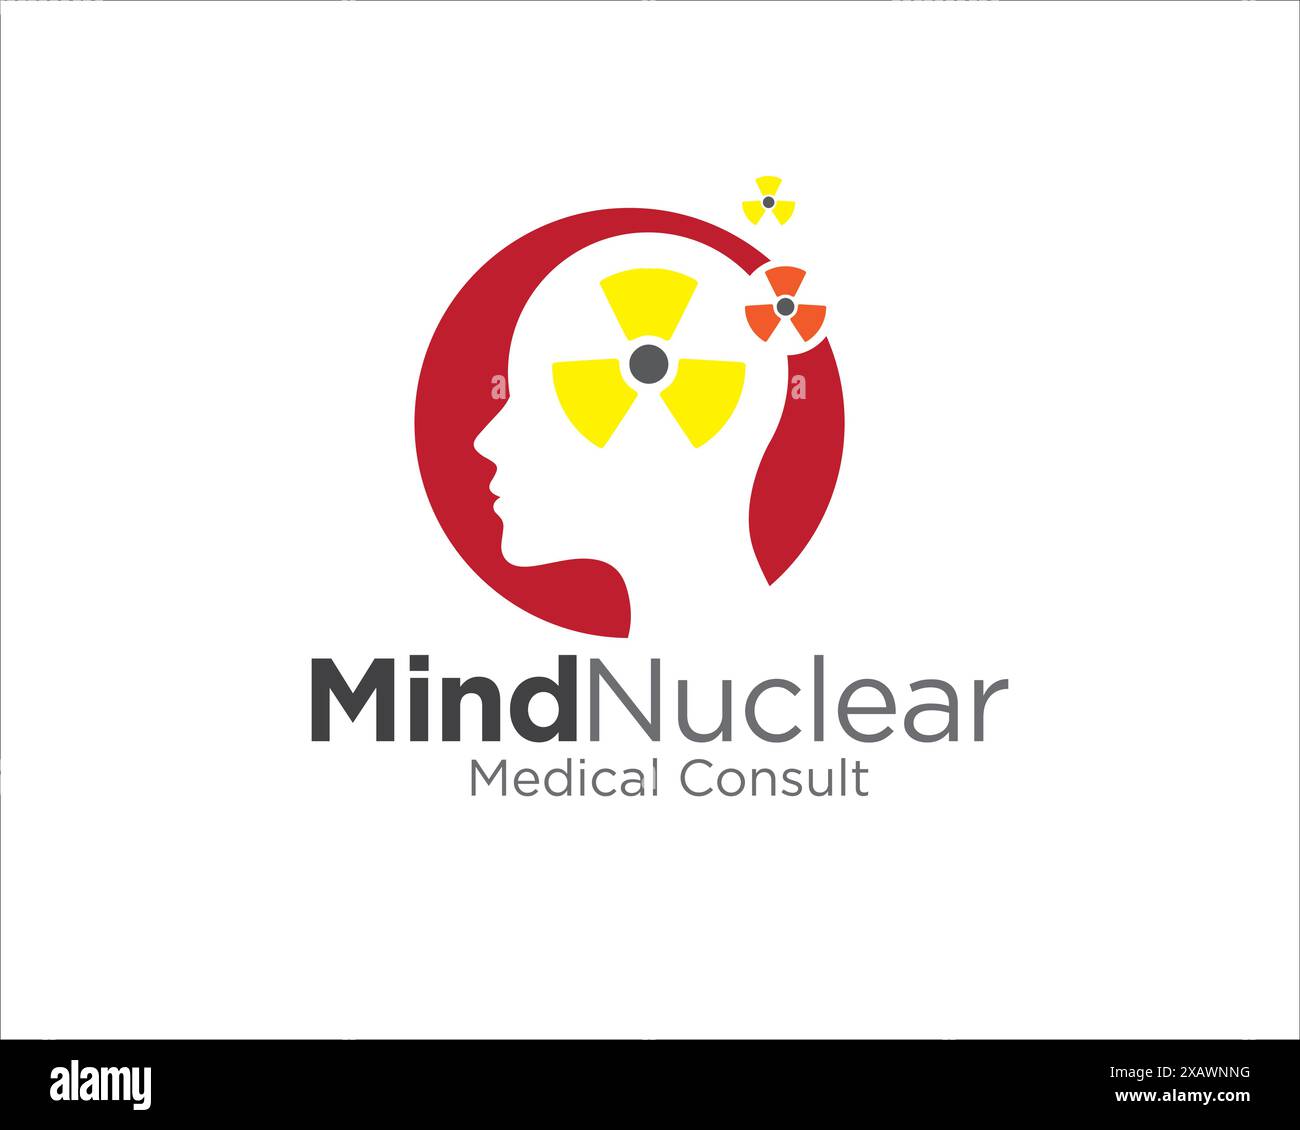 mind nuclear logo designs for medical consult logo Stock Vector